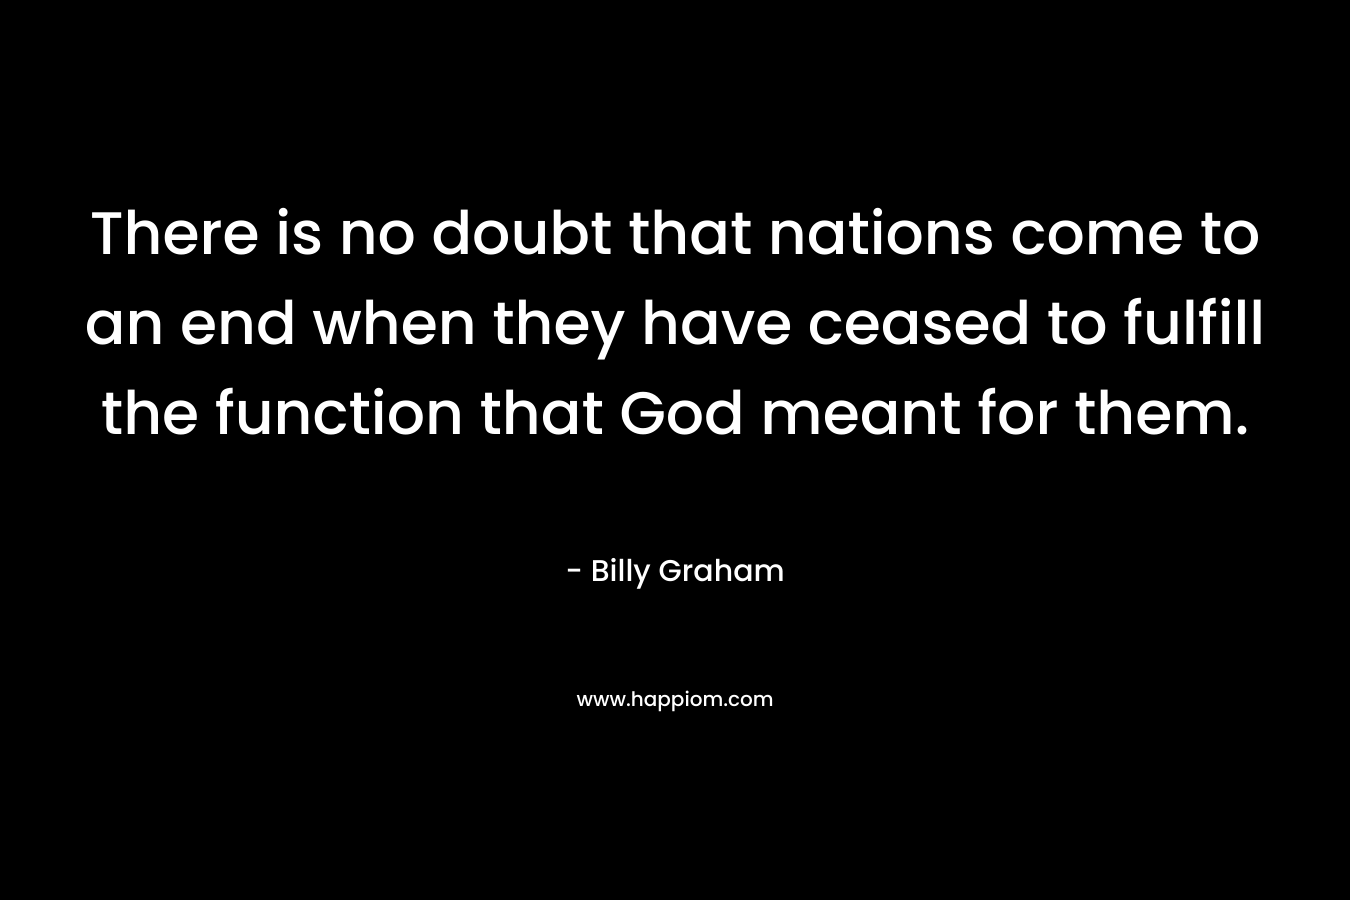 There is no doubt that nations come to an end when they have ceased to fulfill the function that God meant for them.